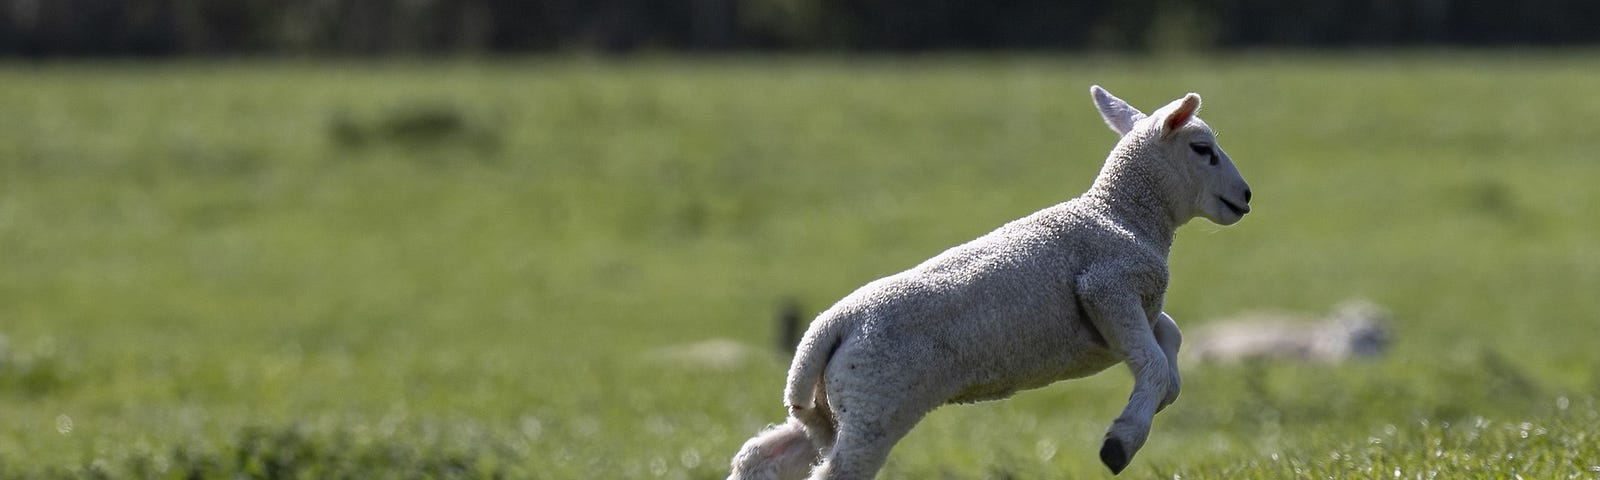 Two white lambs lie in the grass in a field. A third lamb leaps into the air in the foreground.